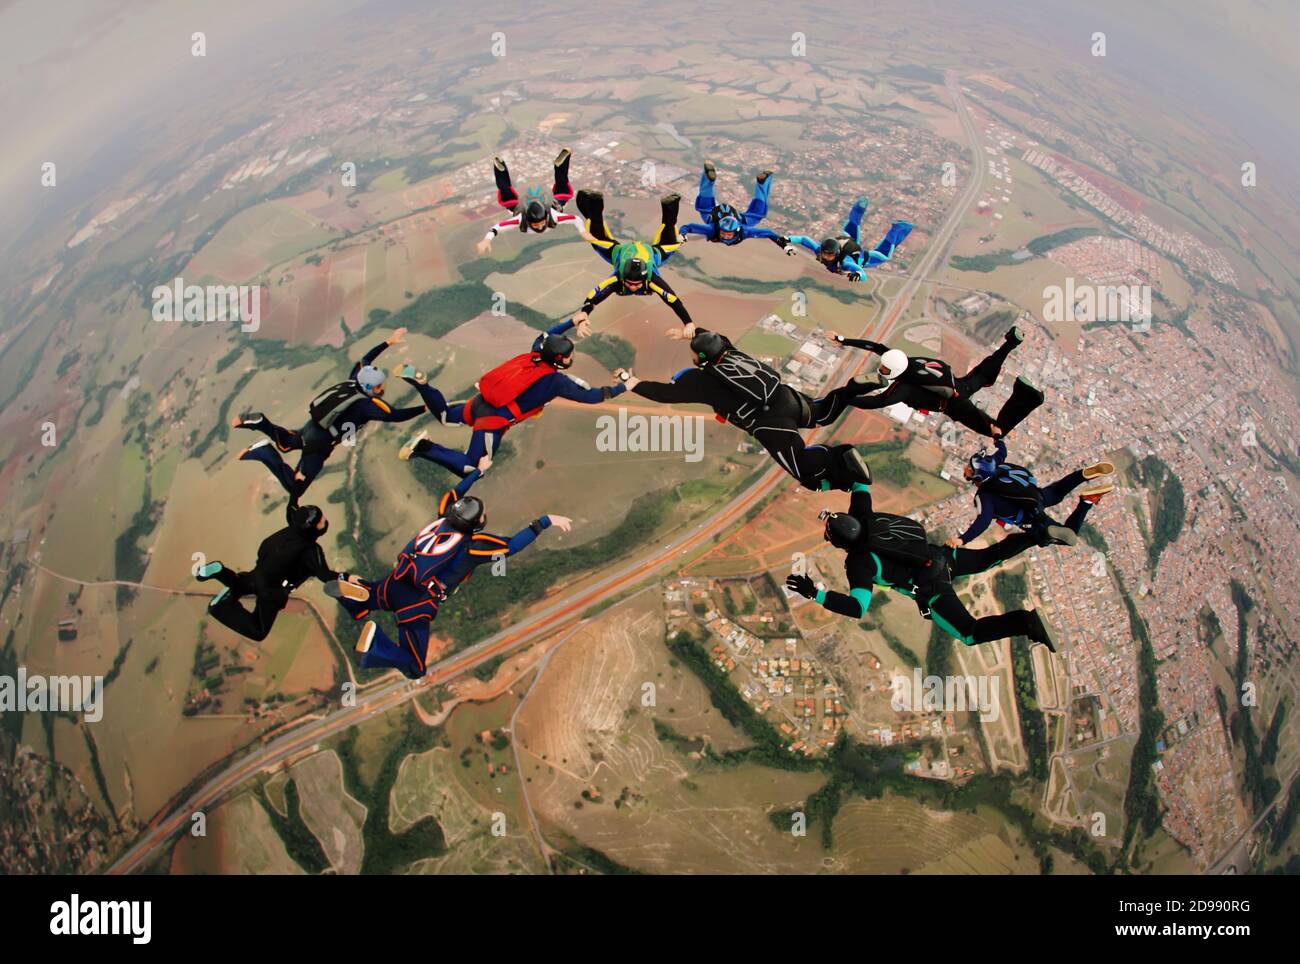 Skydiving group formation Stock Photo